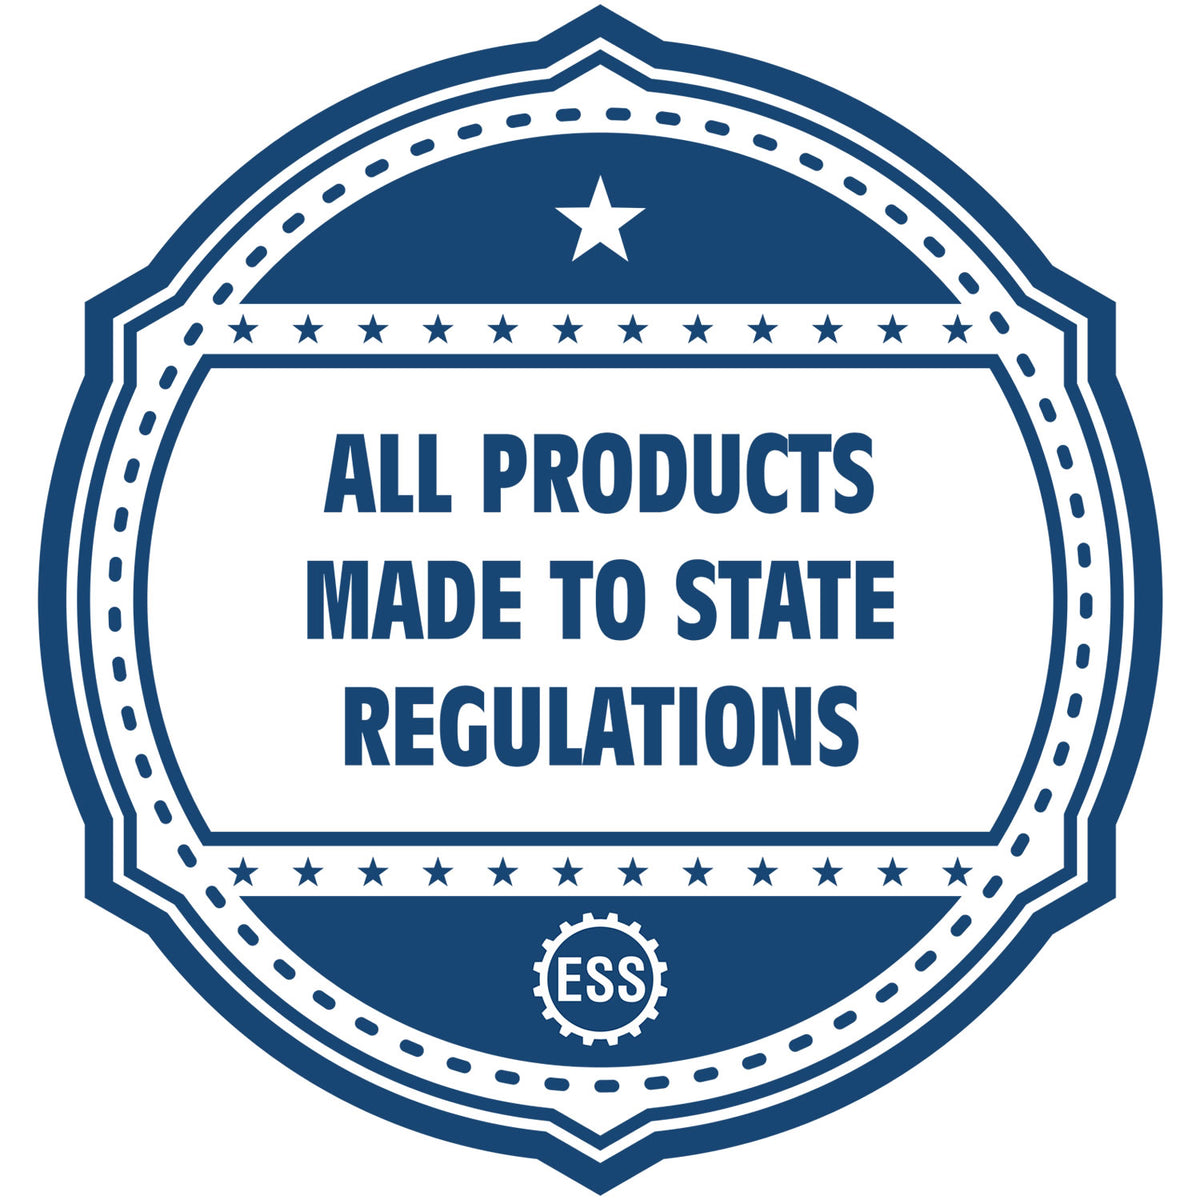 An icon or badge element for the Slim Pre-Inked State Seal Notary Stamp for Connecticut showing that this product is made in compliance with state regulations.